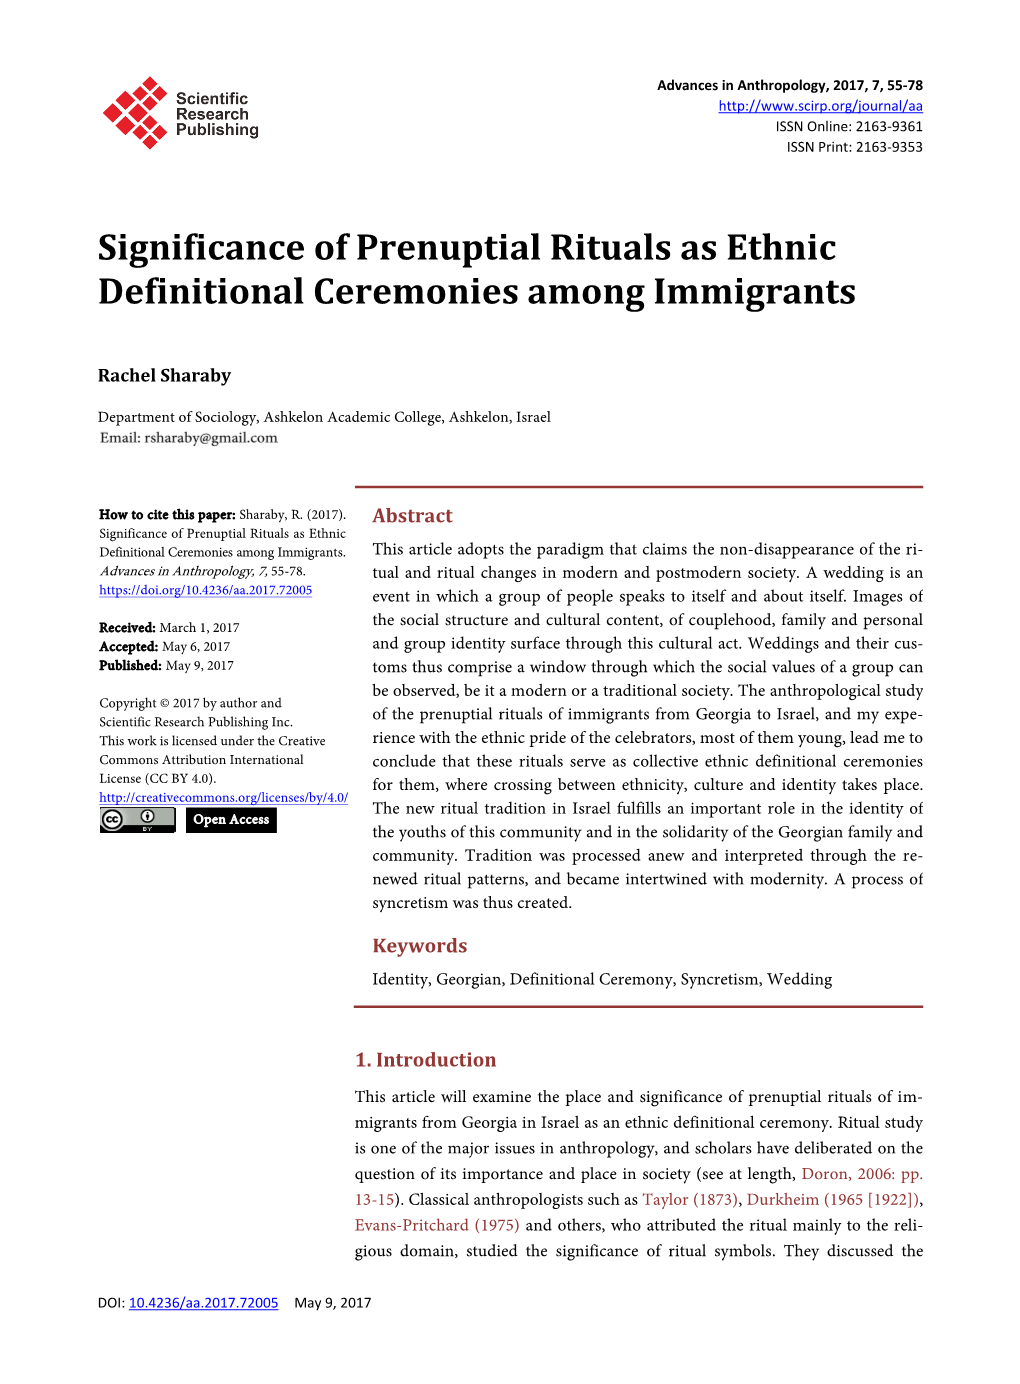 Significance of Prenuptial Rituals As Ethnic Definitional Ceremonies Among Immigrants